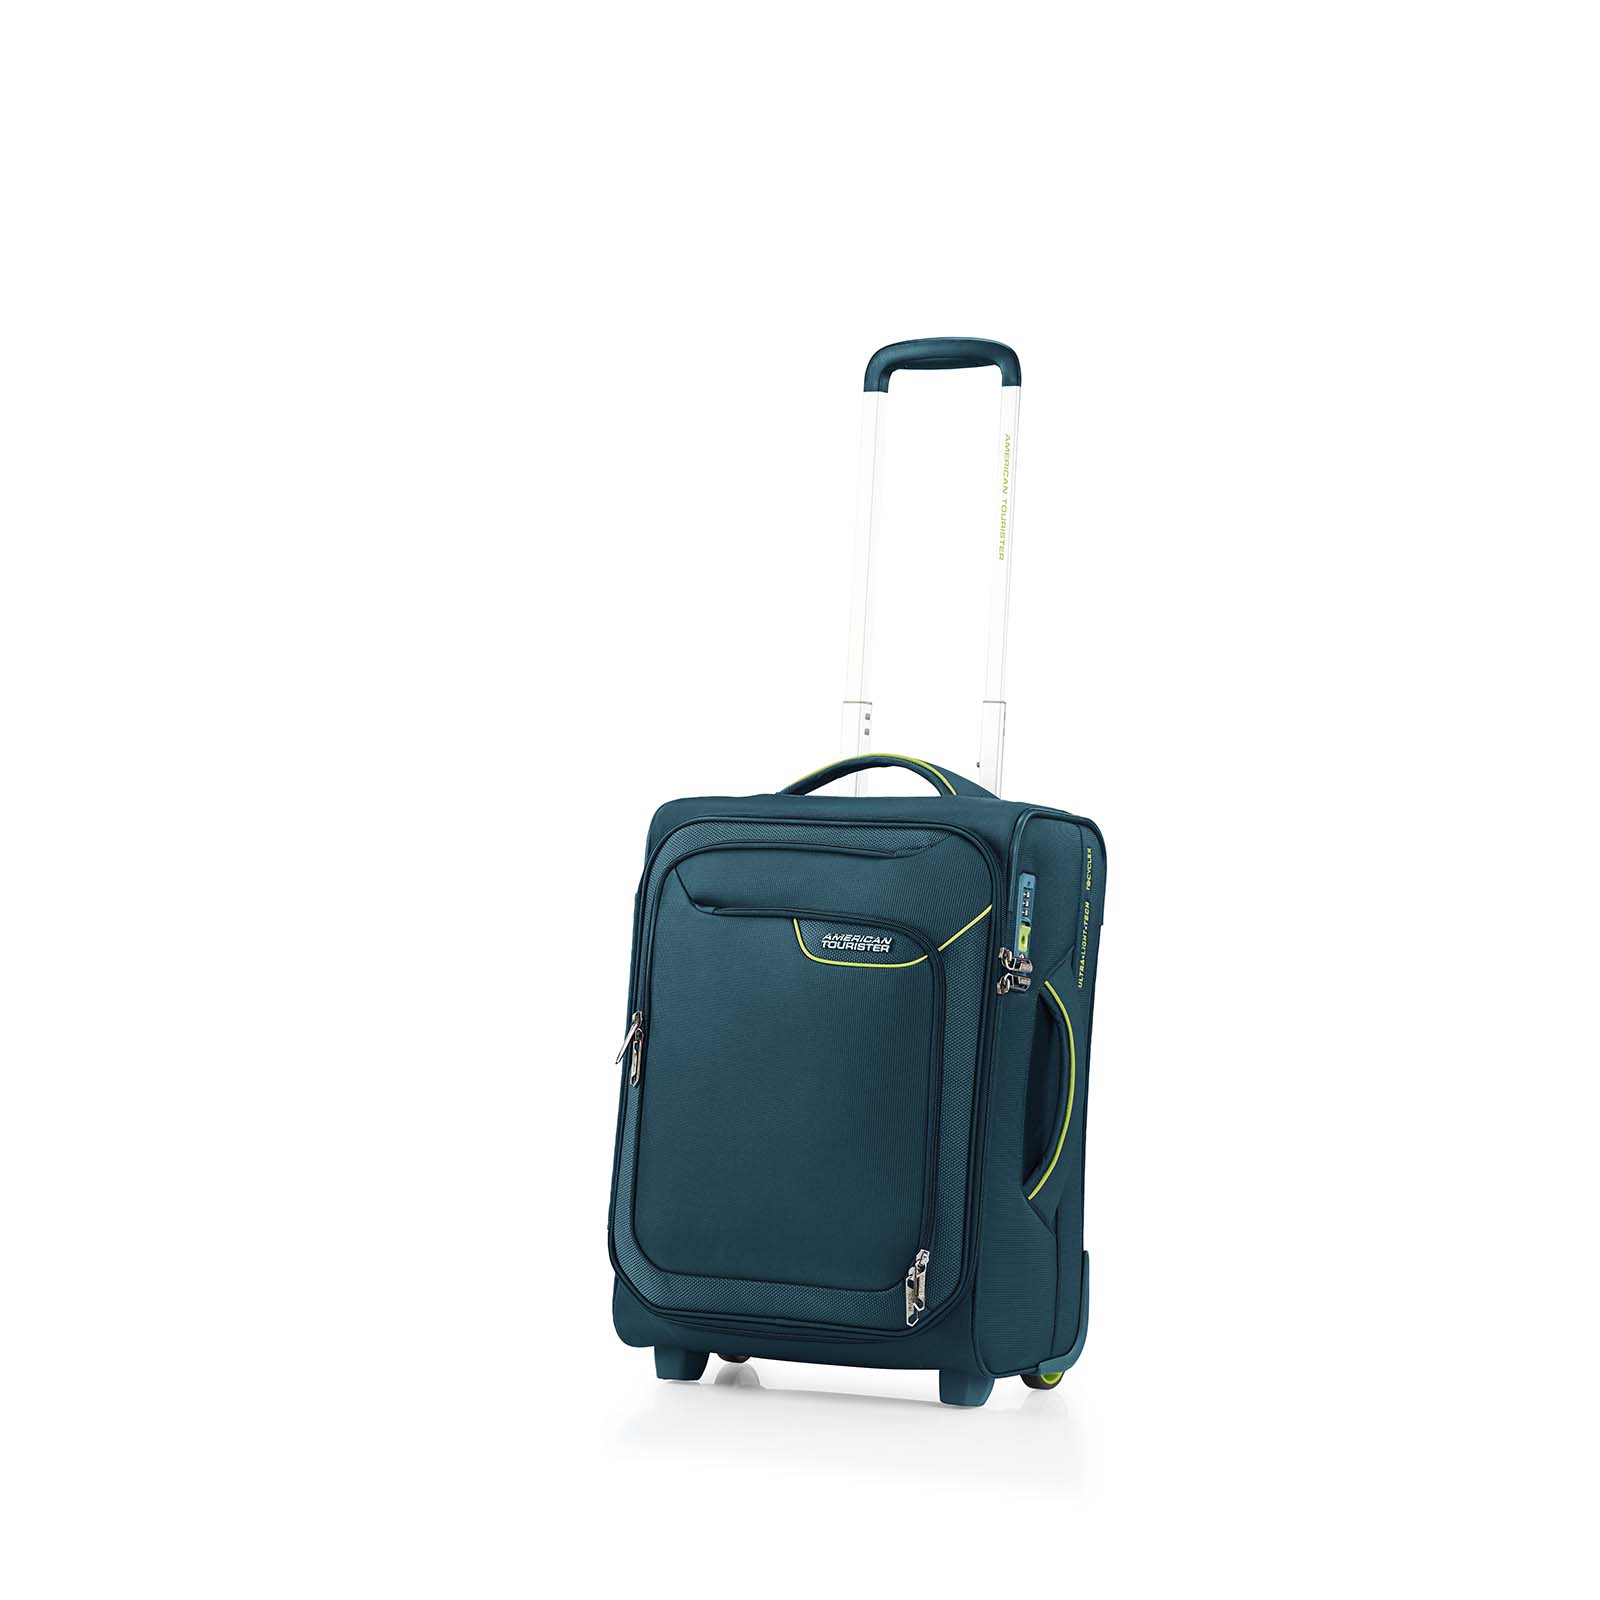 American-Tourister-Applite-4-Eco-50cm-Carry-On-Suitcase-Varsity-Green-Angle